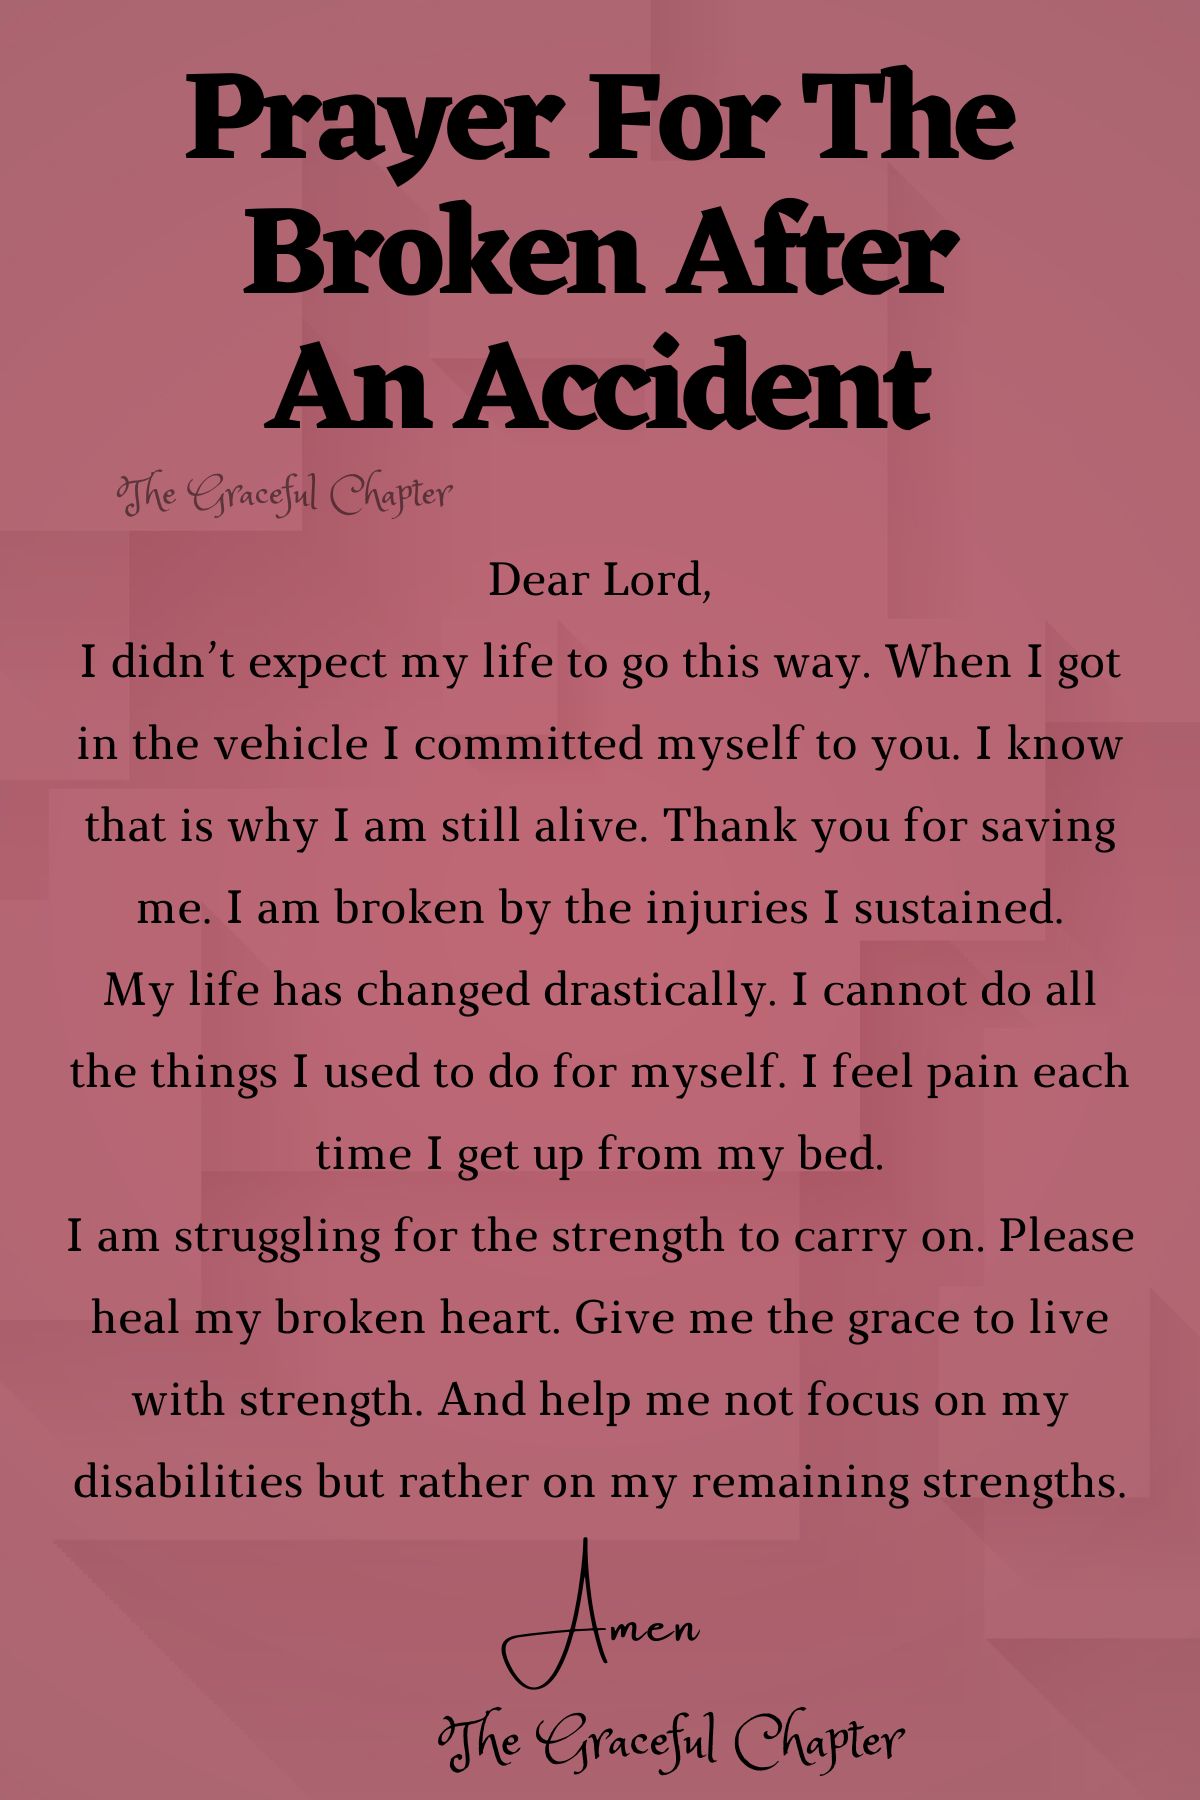 For the broken after an accident